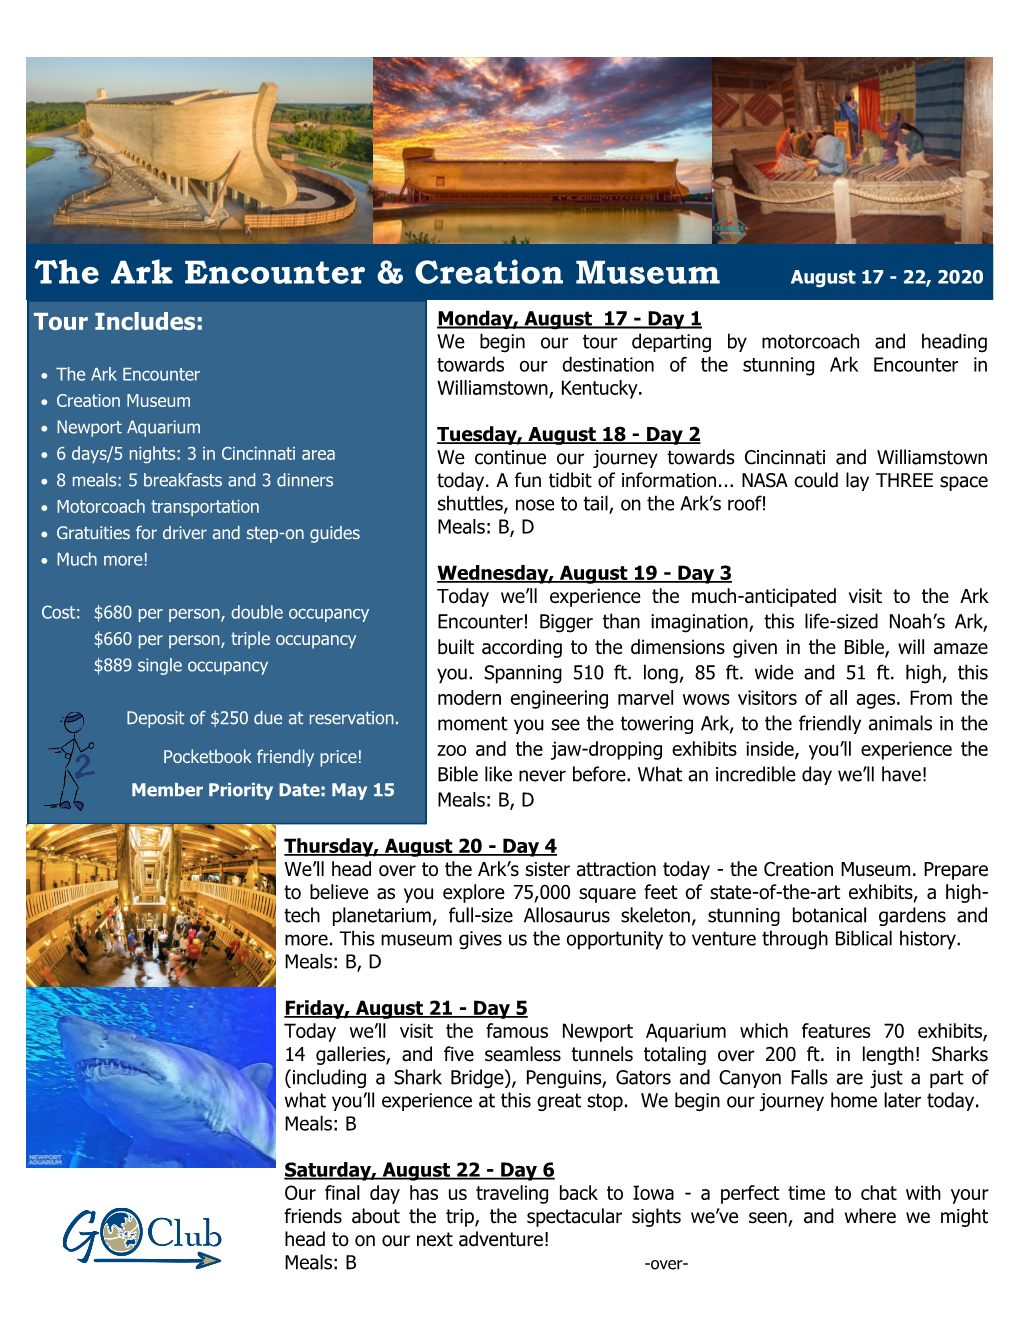 The Ark Encounter & Creation Museum